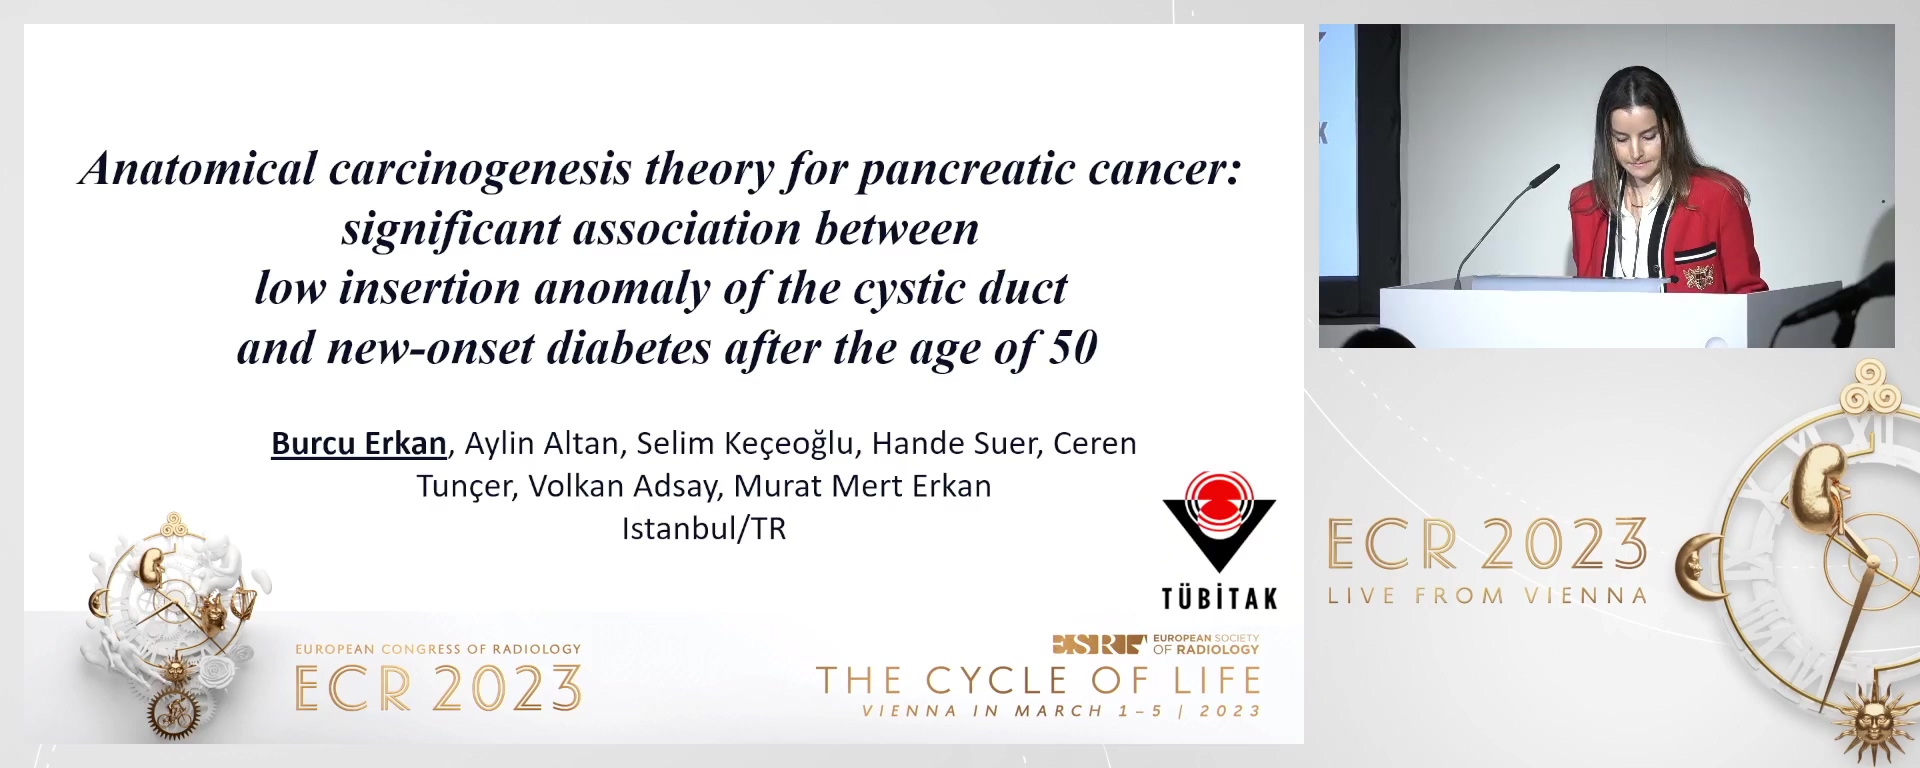 Anatomical carcinogenesis theory for pancreatic cancer: significant association between low insertion anomaly of the cystic duct and new-onset diabetes after the age of 50 - Burcu Erkan, Istanbul / TR